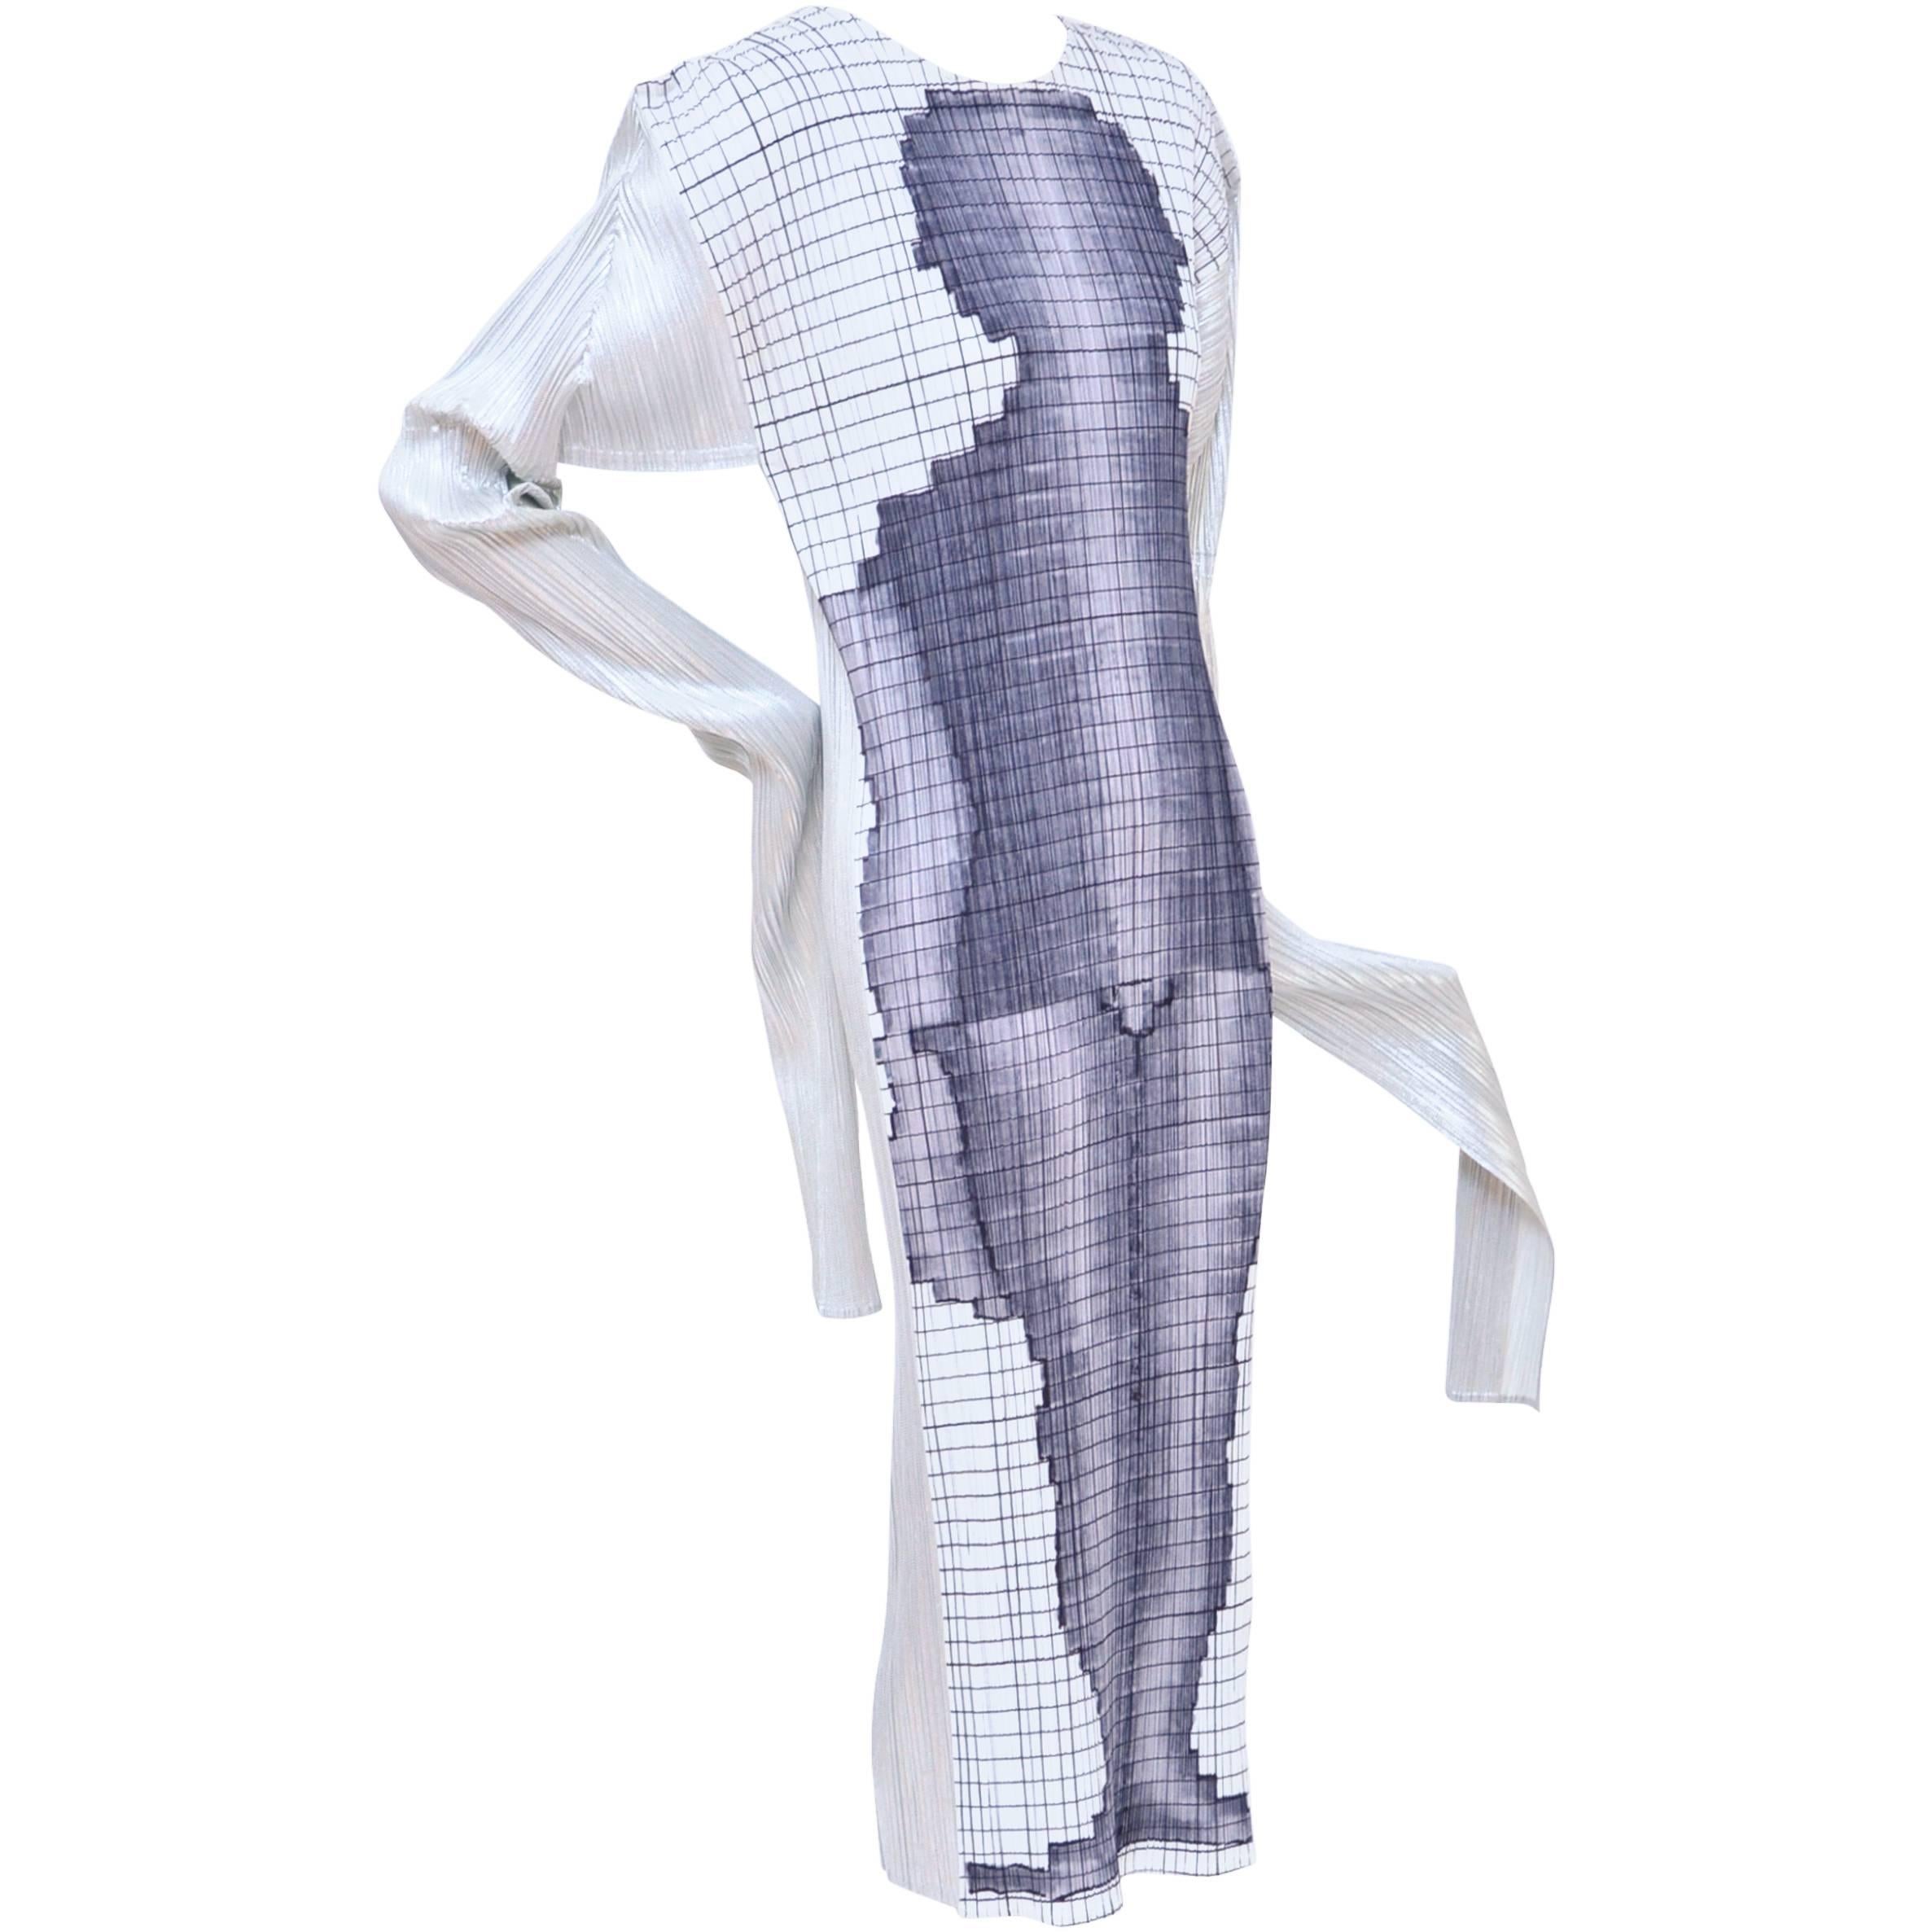 Collector's  Issey Miyake Dress Guest Artist Series No. 3 Tim Hawkinson  For Sale